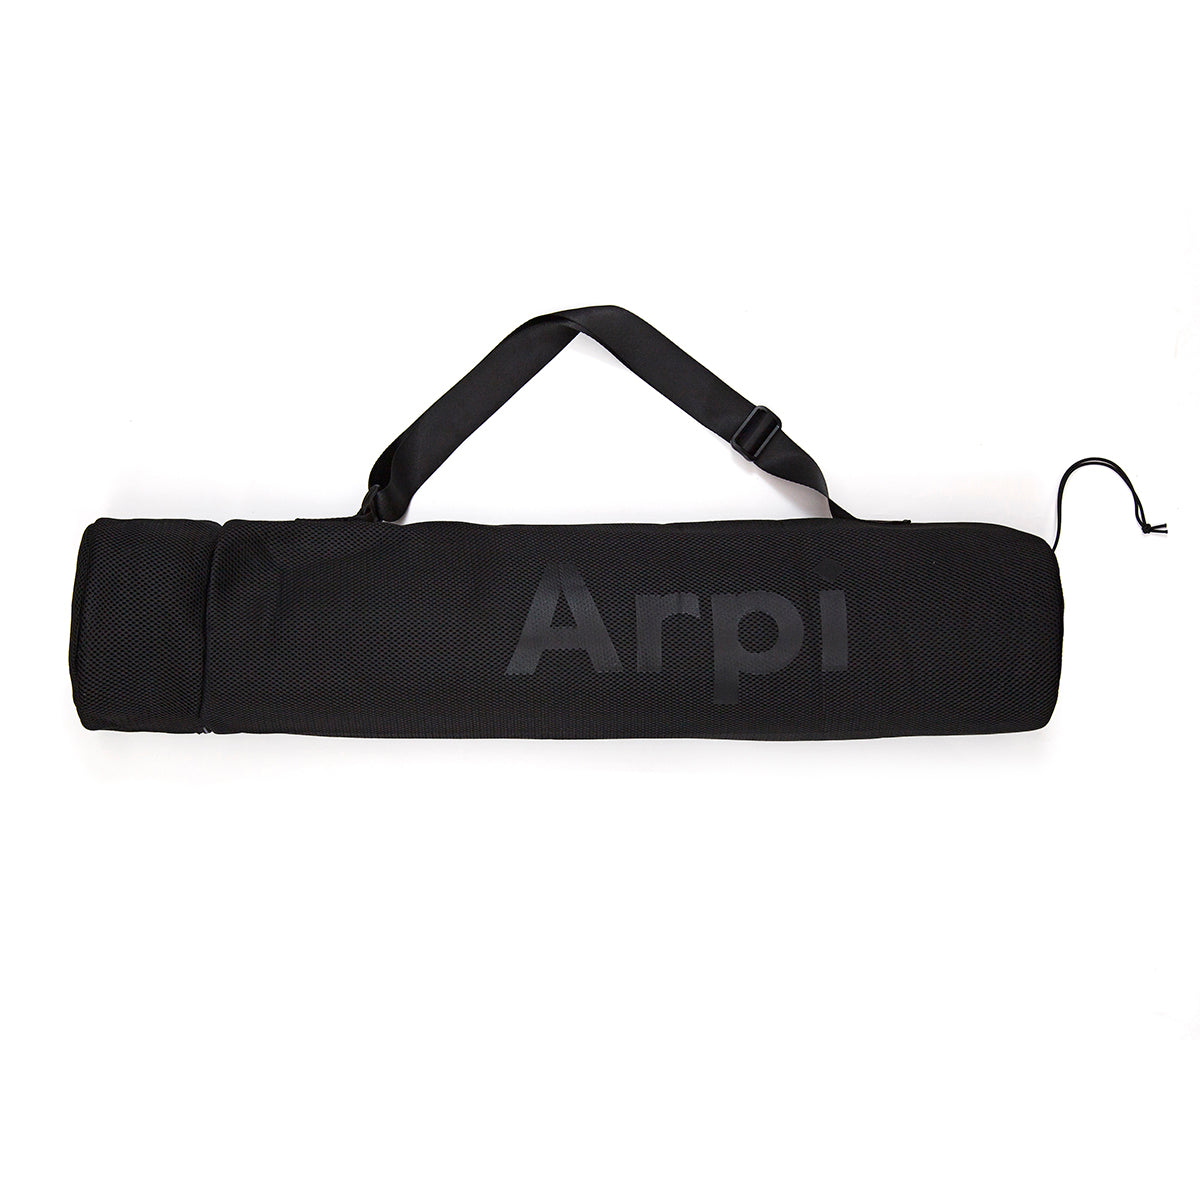 3F Arpi travel yoga mat bag for hot yoga and outdoor workout